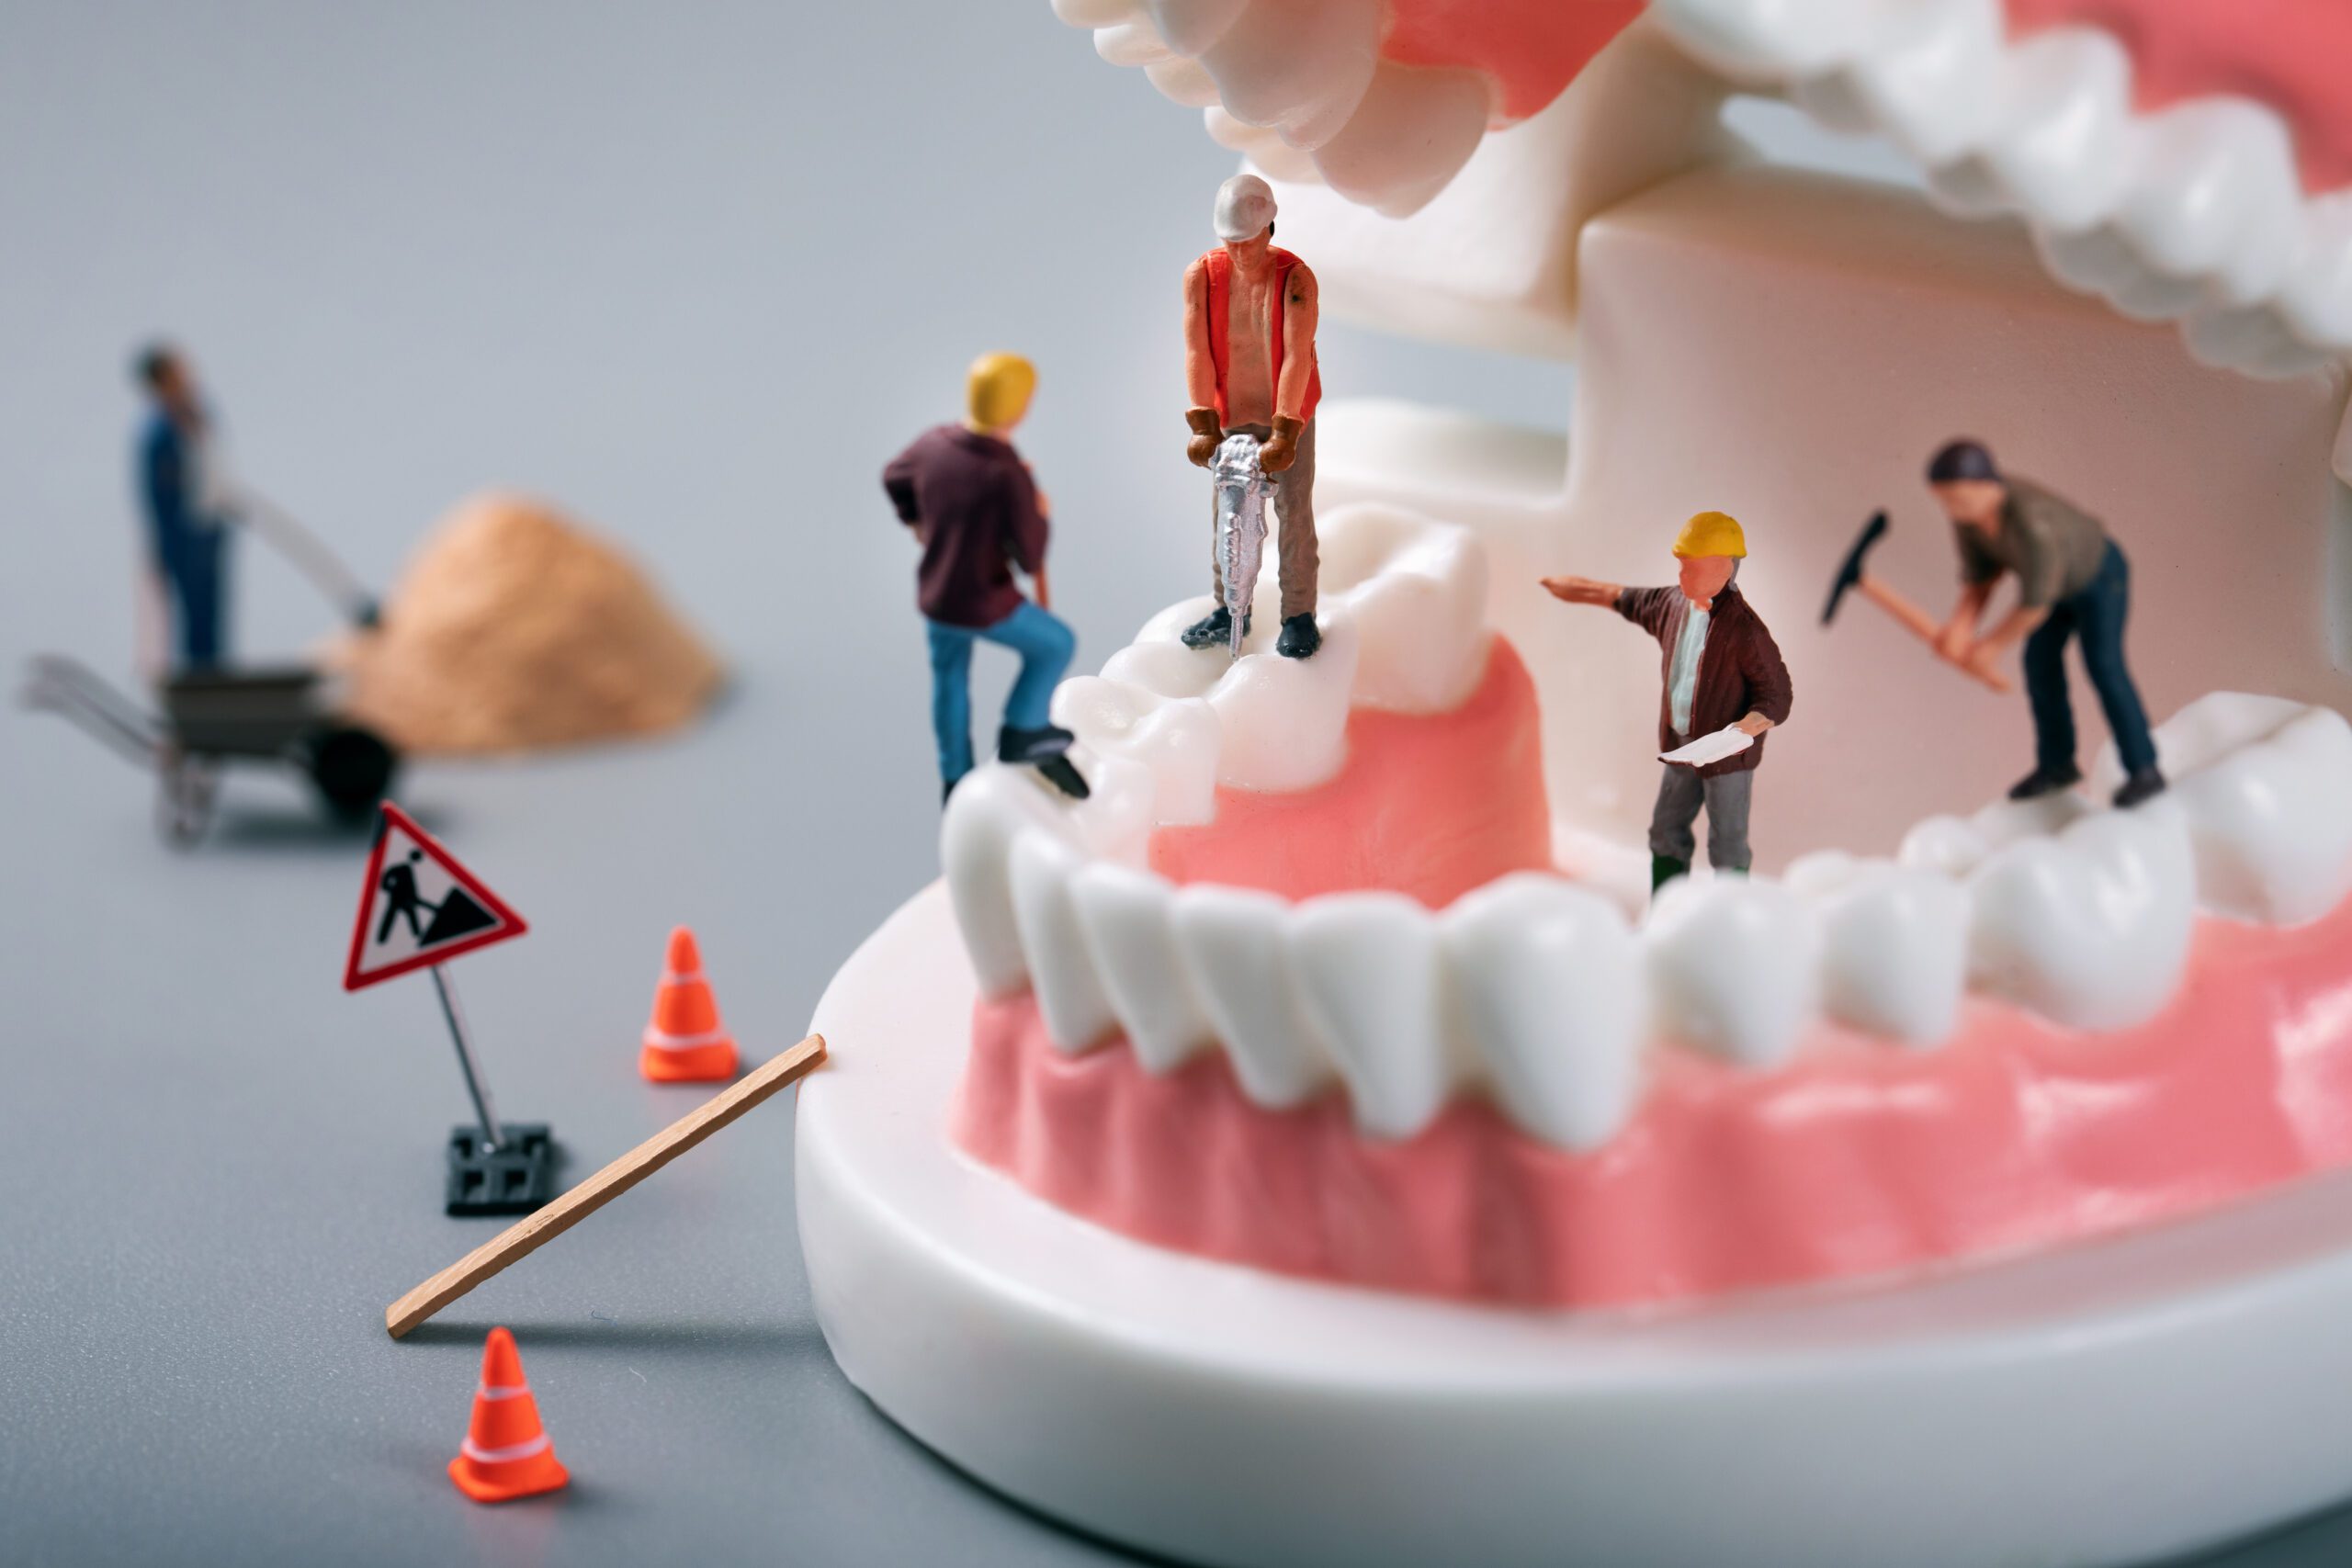 dental treatment concept - construction workers figurines on too